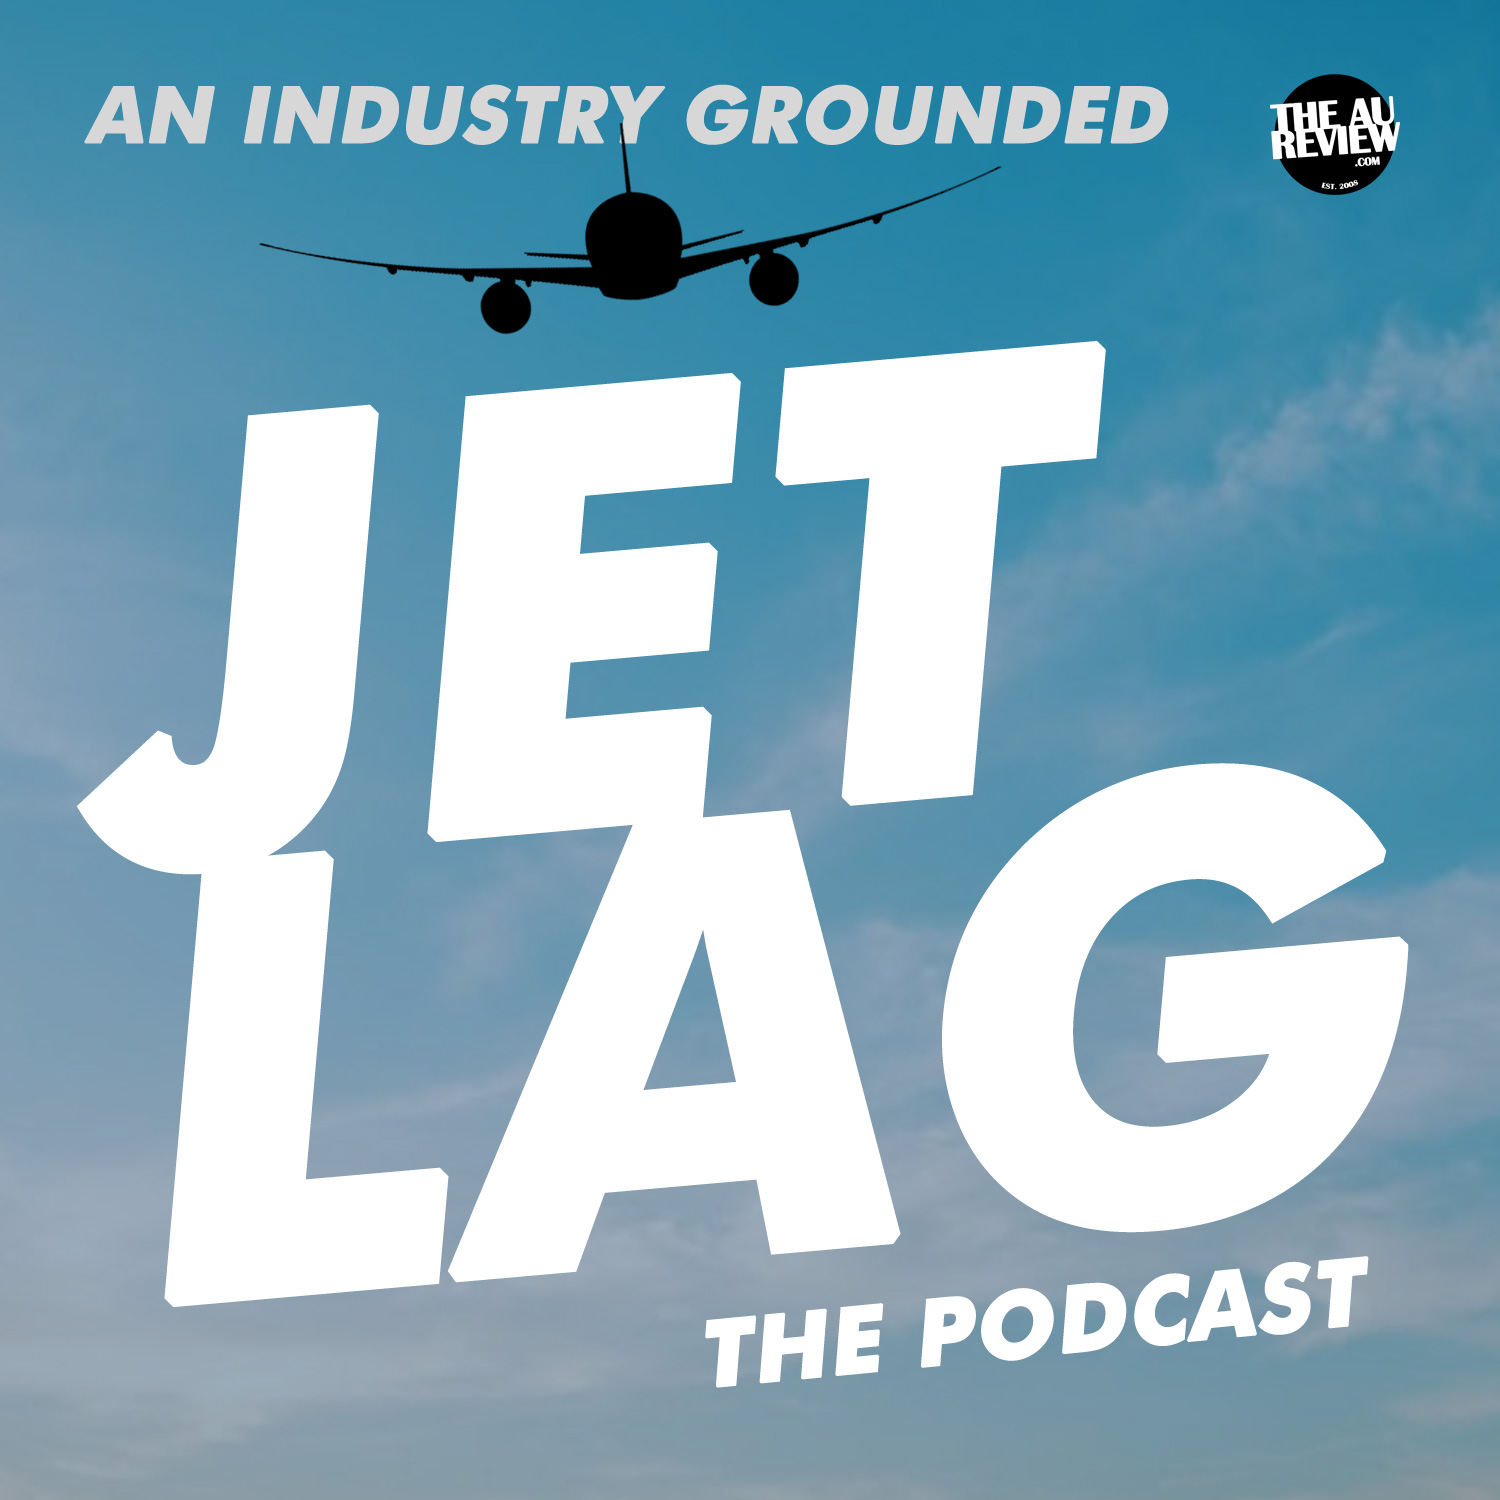 Jetlag: The Podcast - An Industry Grounded